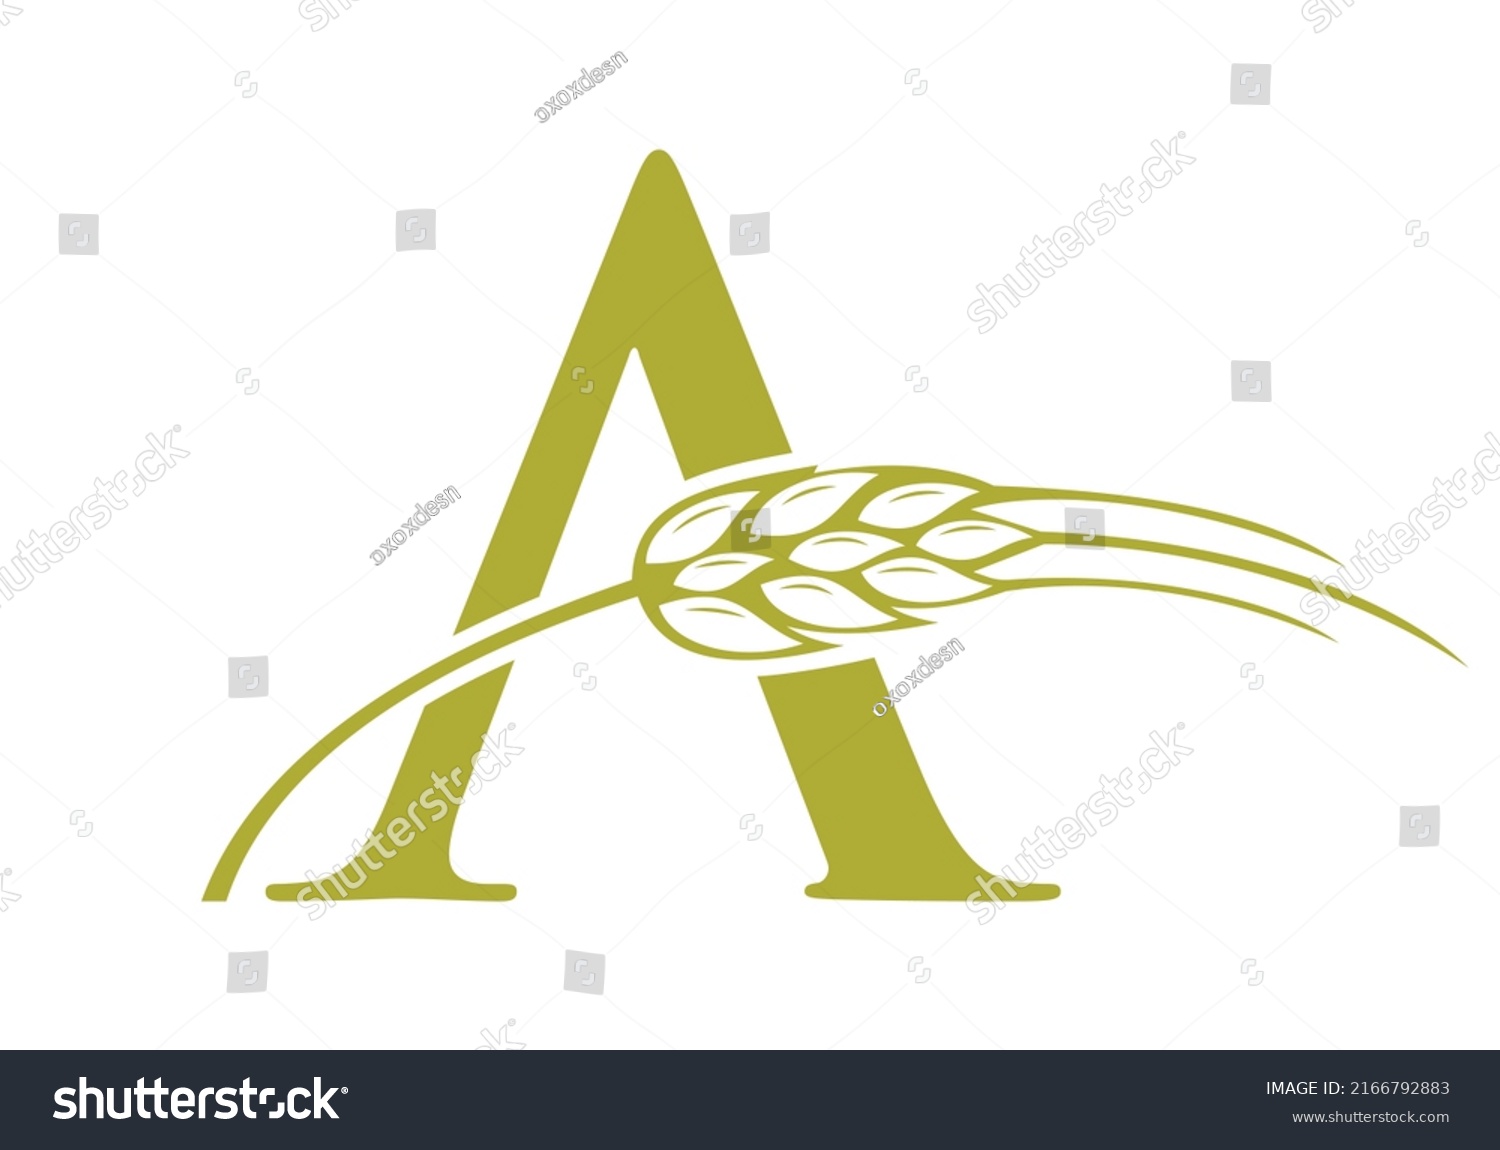 Letter Agriculture Logo Farming Sign Agriculture Stock Vector (Royalty ...